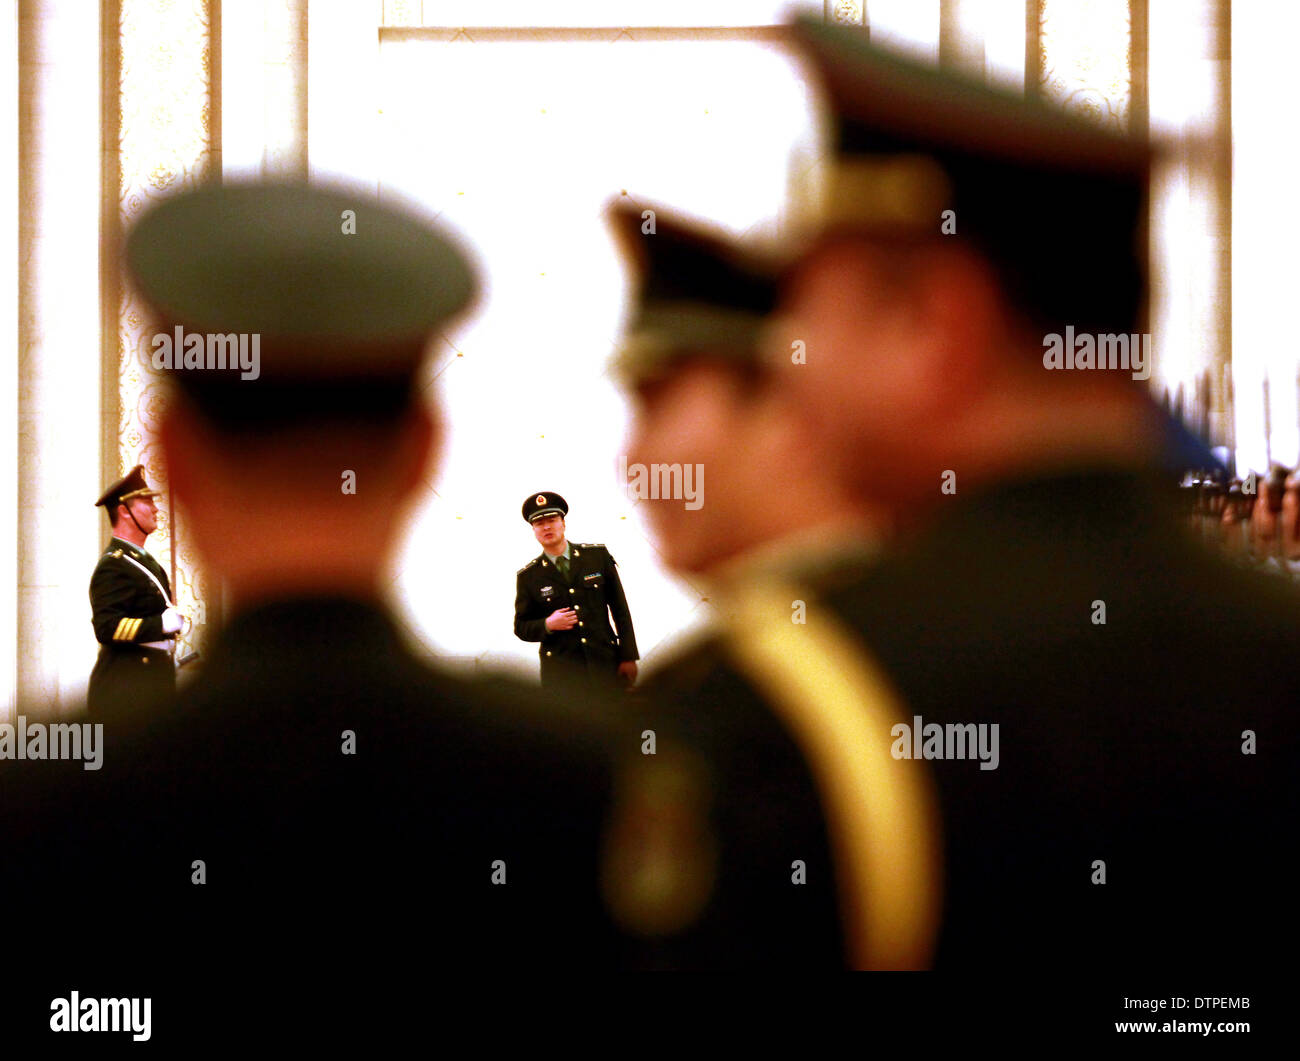 Beijing, CHINA, China. 19th Feb, 2014. Chinese soldiers perform military honor guard duties during a welcoming ceremony at the Great Hall of the People in Beijing on February 19, 2014. Soldiers in China's army have grown so big that they no longer fit comfortably in their tanks, according to research by the military. After surveying nearly 20,000 ground-force soldiers, the military found that their average physique had increased by 2 cm in height and 5 cm in waist girth over the past two decades. © Stephen Shaver/ZUMAPRESS.com/Alamy Live News Stock Photo